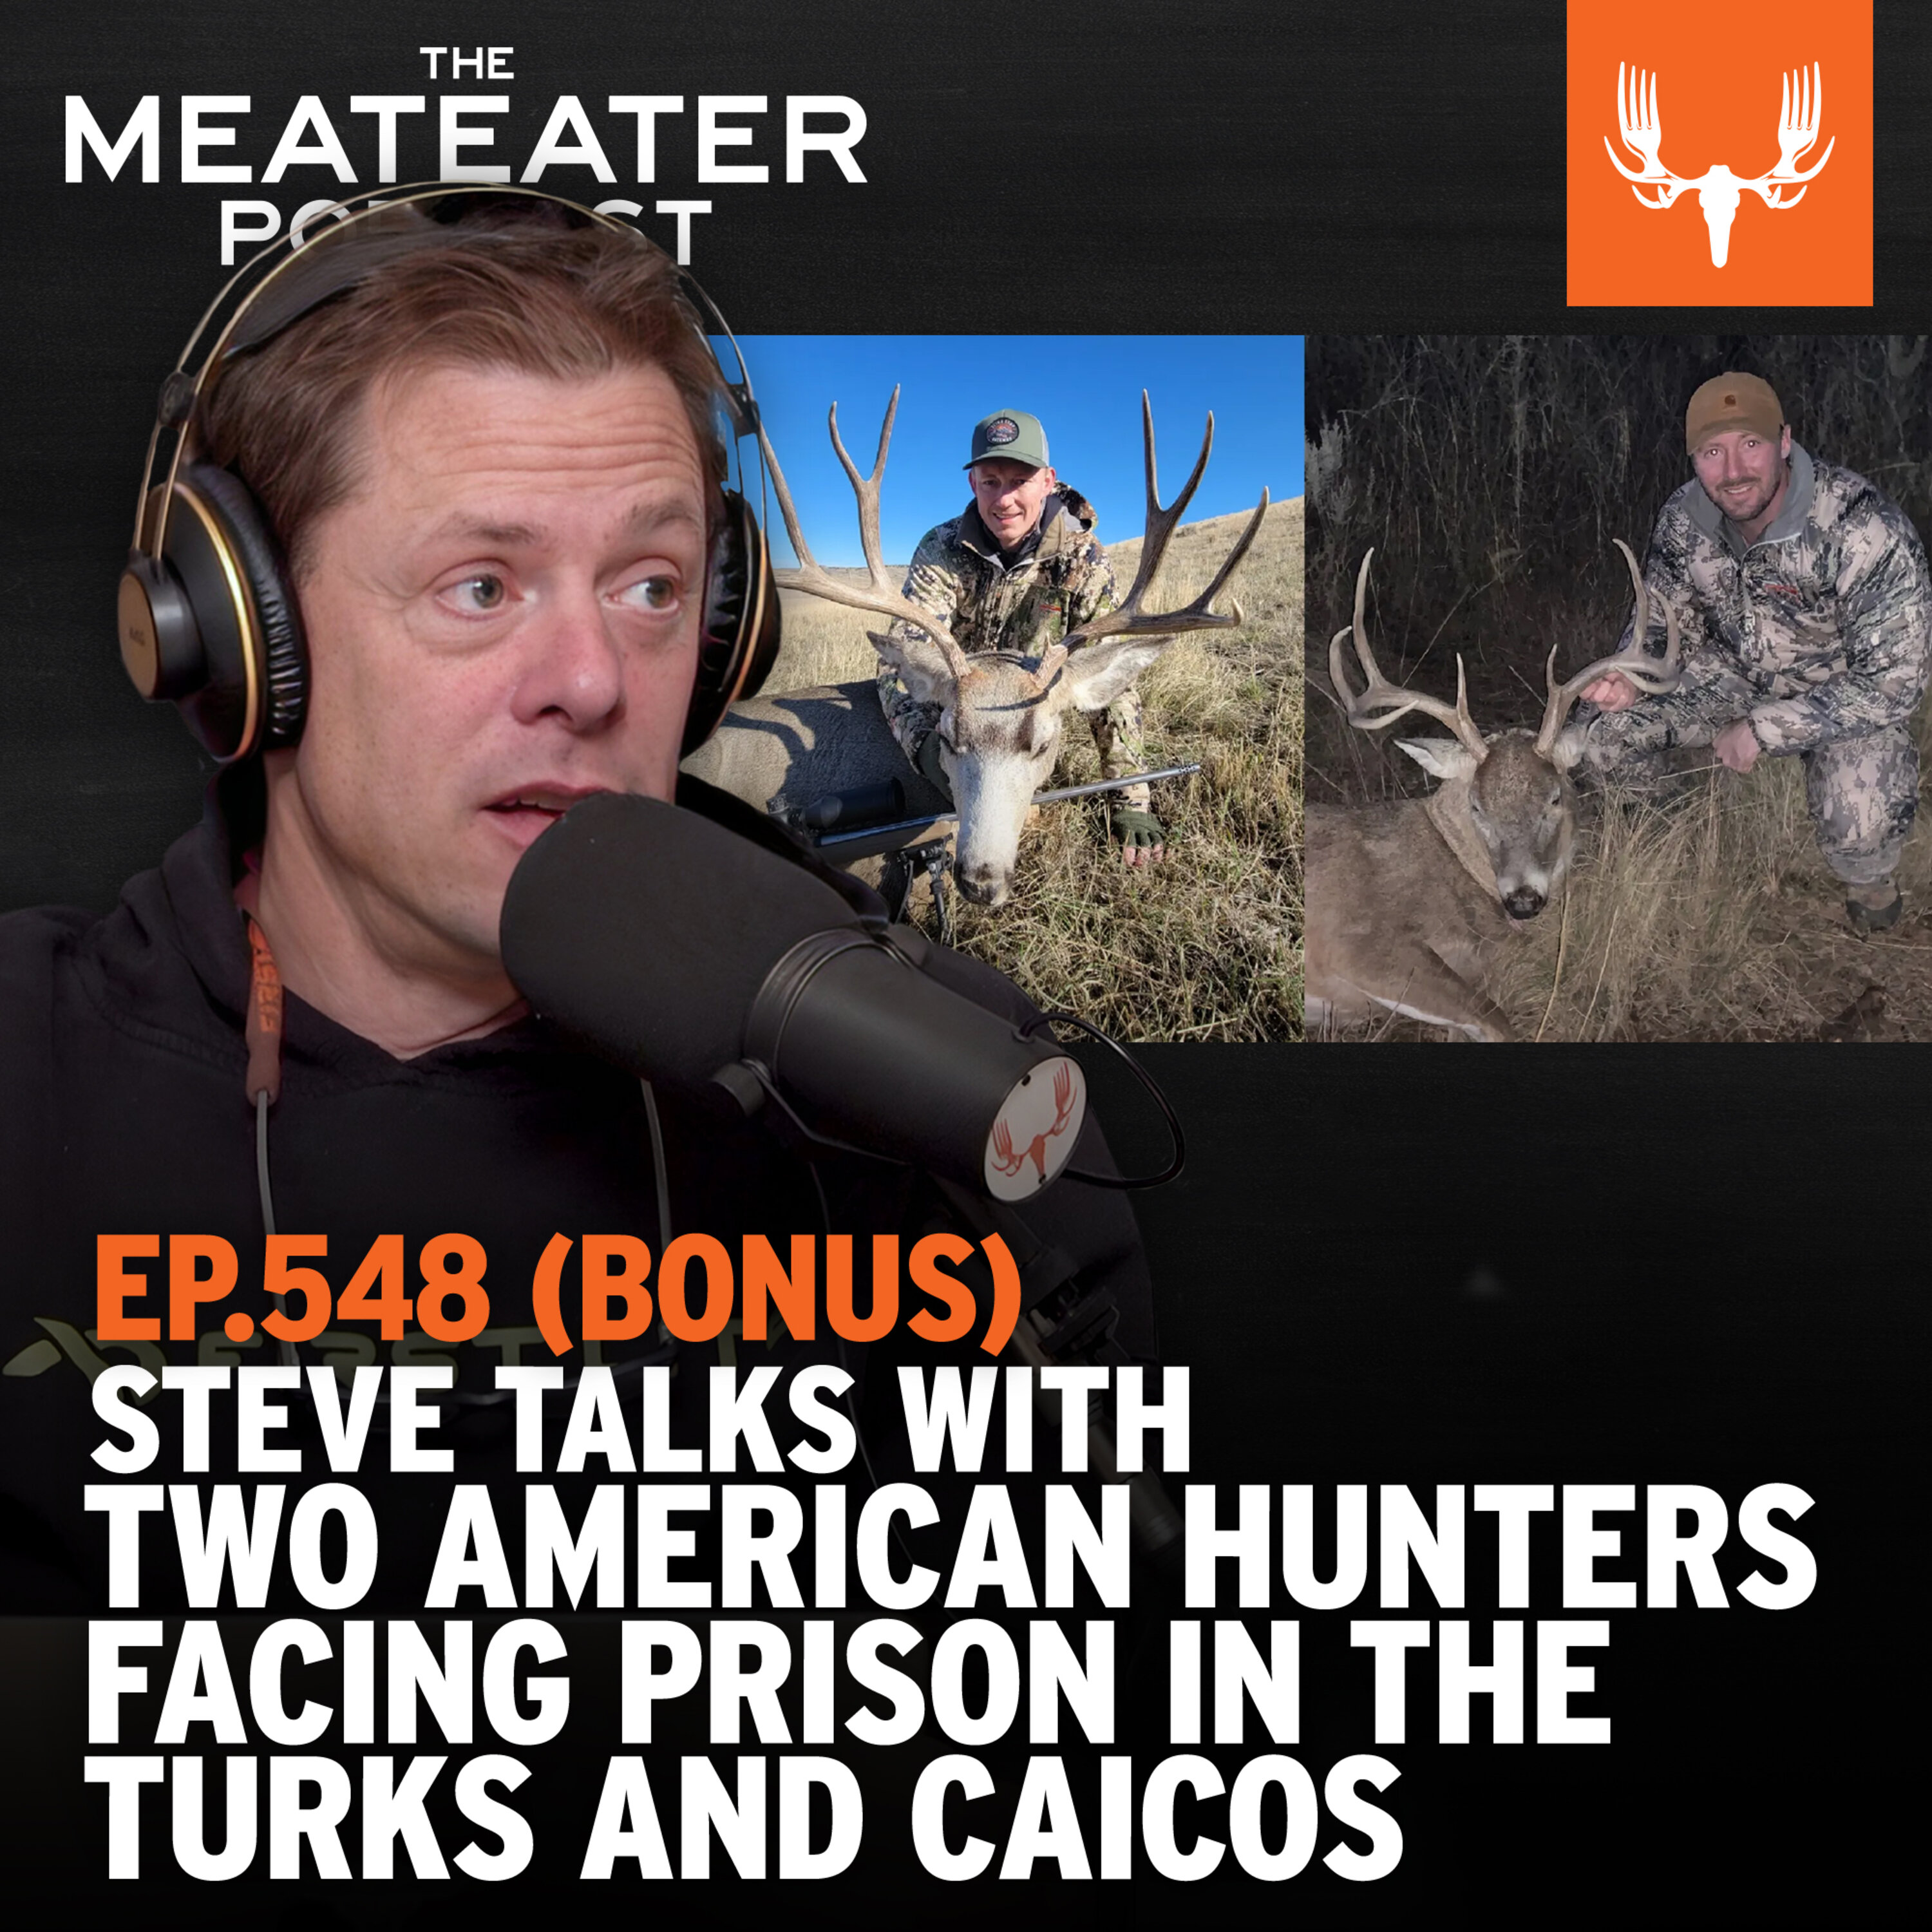 Ep. 548: BONUS DROP - Steve Talks with Two American Hunters Facing Prison in Turks and Caicos